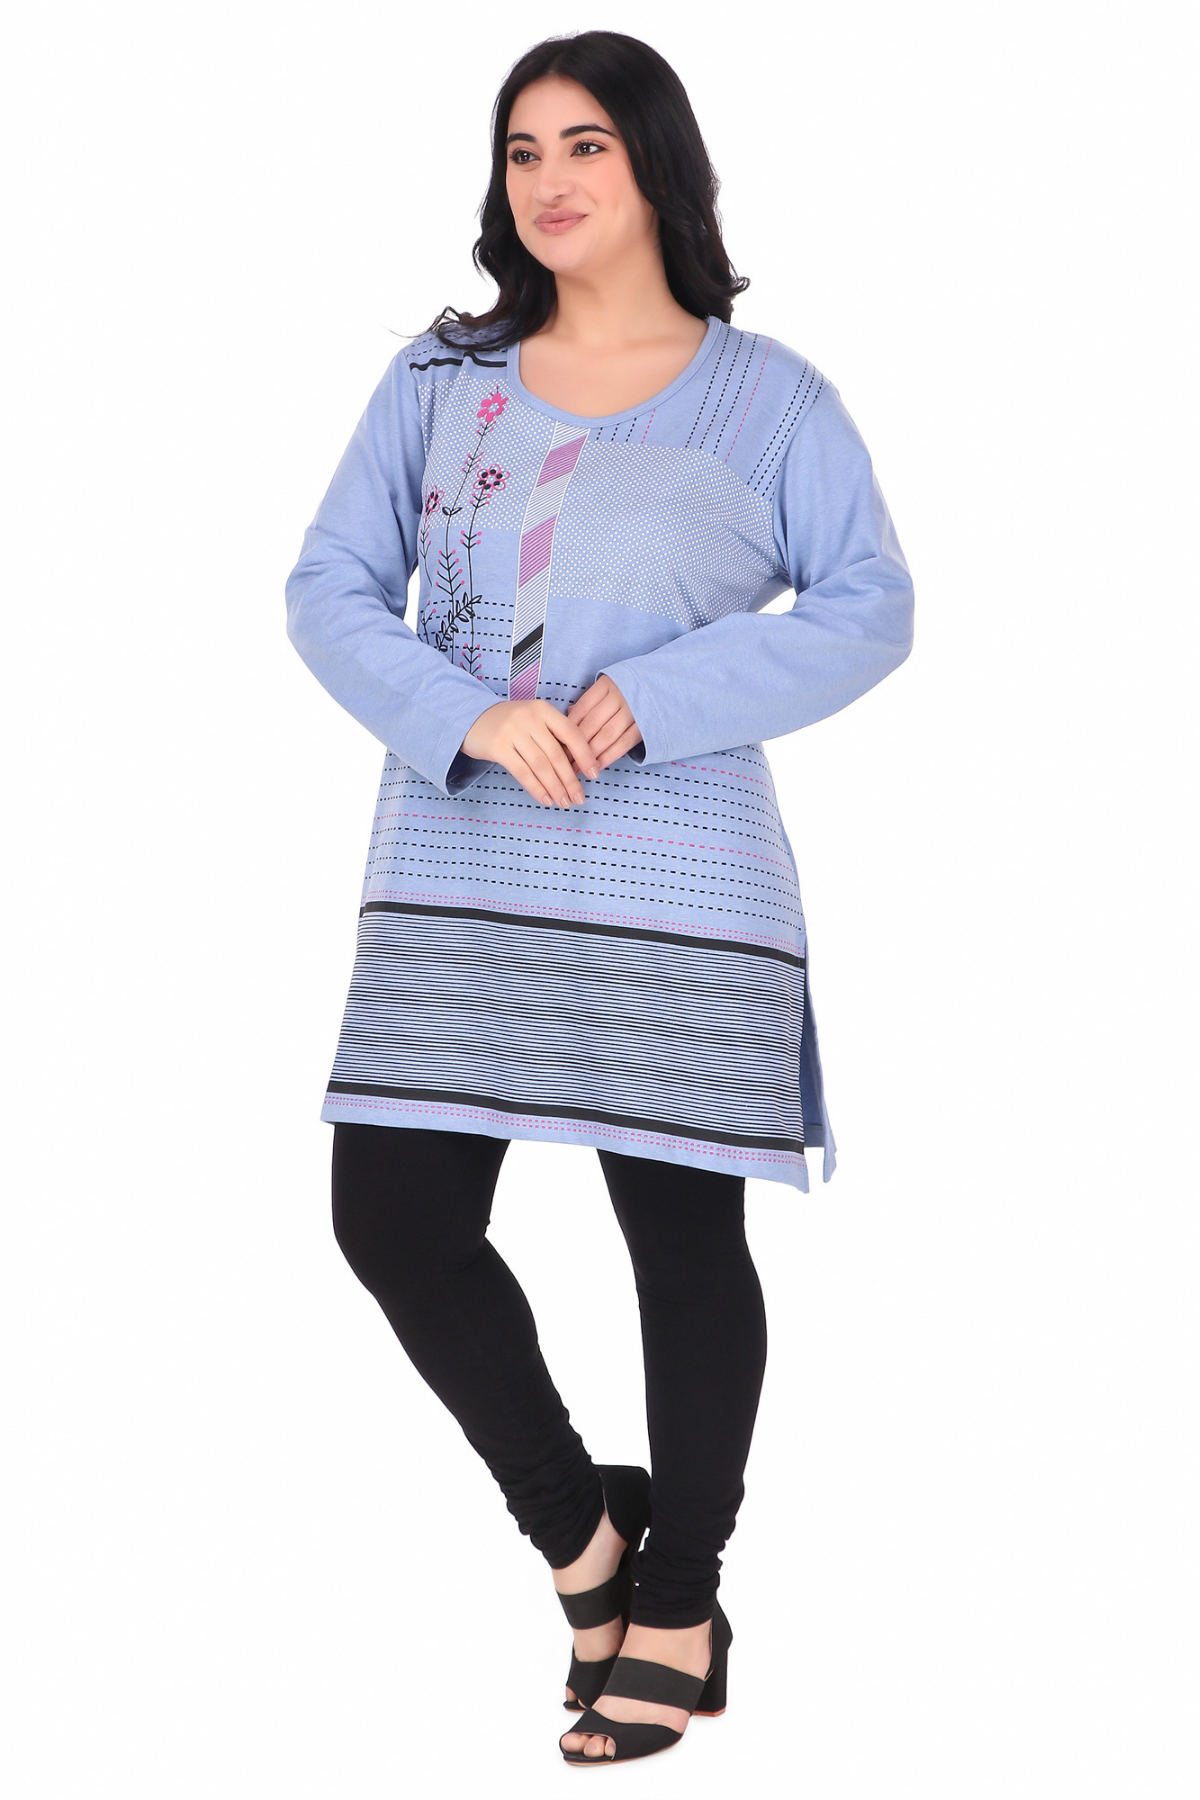 Plus Size Printed Long Tops For Women Full Sleeves T-shirts - Sky Blue